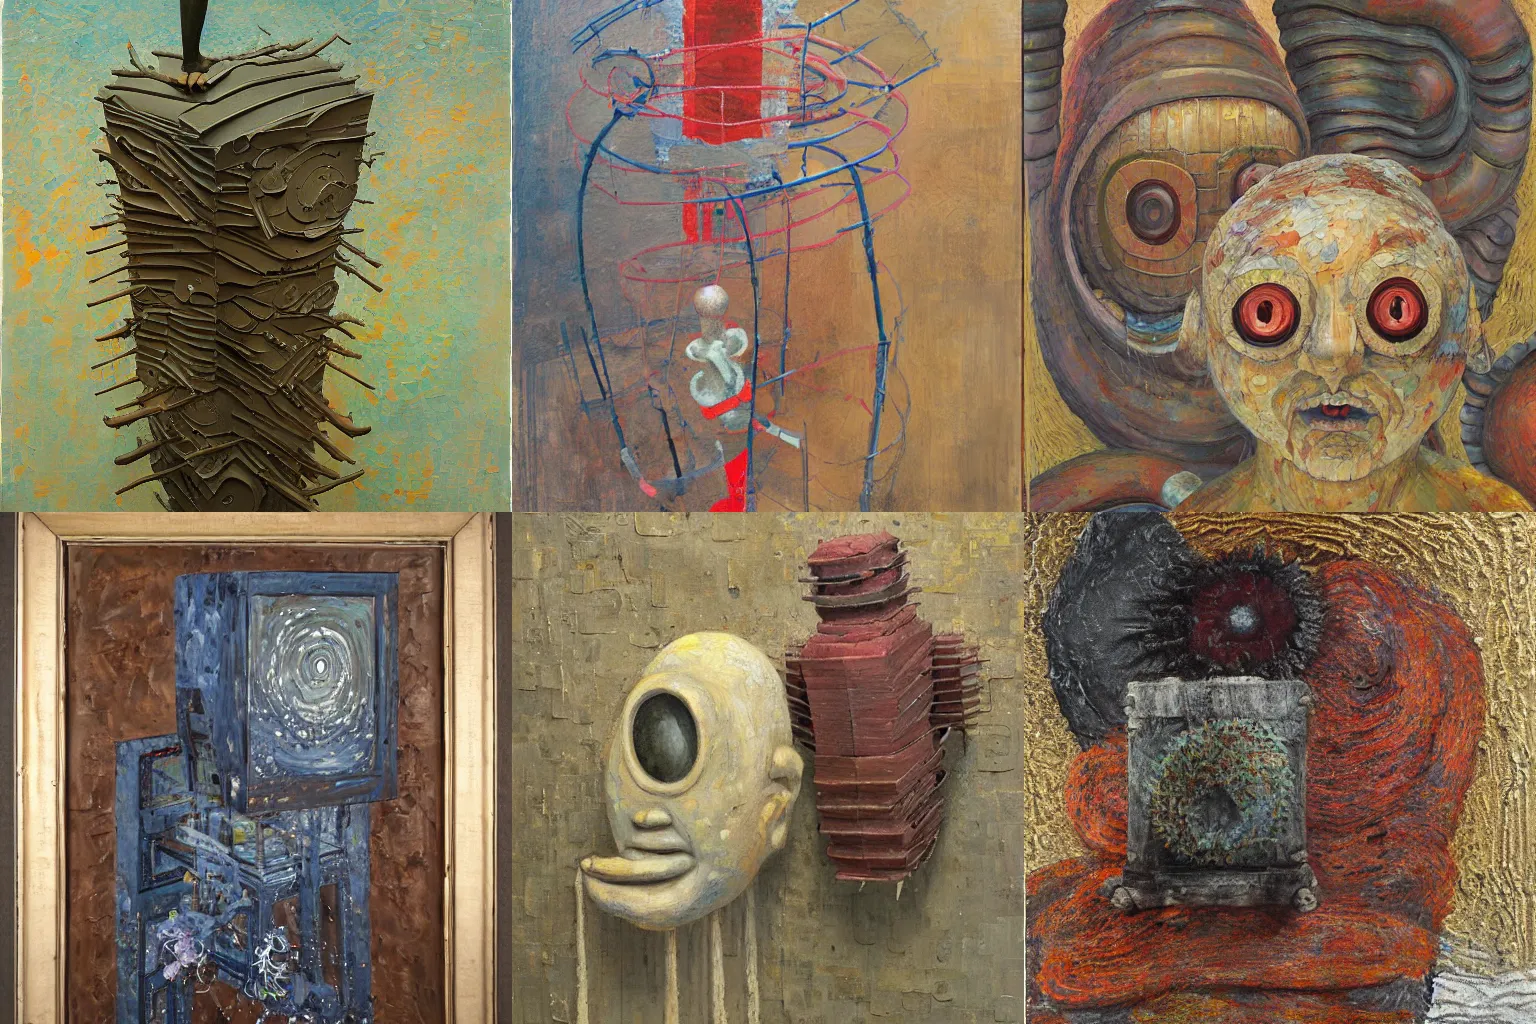 Prompt: a detailed, impasto painting by shaun tan and louise bourgeois of an abstract forgotten sculpture by ivan seal and the caretaker, voidpunk